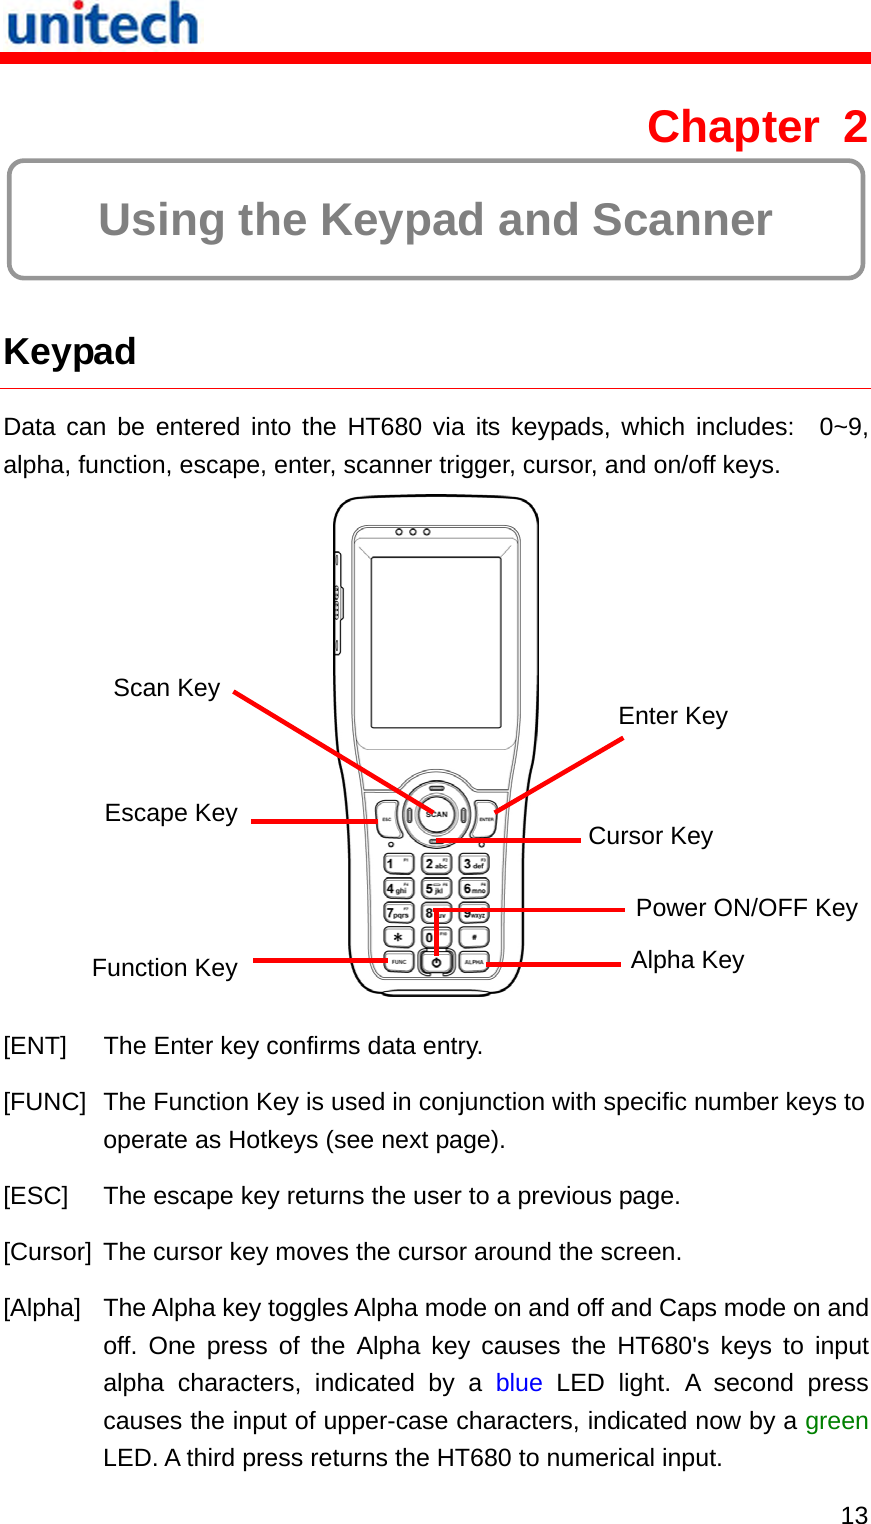   13 Chapter 2  Using the Keypad and Scanner  Keypad Data can be entered into the HT680 via its keypads, which includes:  0~9, alpha, function, escape, enter, scanner trigger, cursor, and on/off keys.  Enter Key Scan Key Function Key Escape Key Alpha Key Cursor Key Power ON/OFF Key [ENT]  The Enter key confirms data entry. [FUNC]  The Function Key is used in conjunction with specific number keys to operate as Hotkeys (see next page). [ESC]  The escape key returns the user to a previous page. [Cursor]  The cursor key moves the cursor around the screen. [Alpha]  The Alpha key toggles Alpha mode on and off and Caps mode on and off. One press of the Alpha key causes the HT680&apos;s keys to input alpha characters, indicated by a blue LED light. A second press causes the input of upper-case characters, indicated now by a green LED. A third press returns the HT680 to numerical input. 